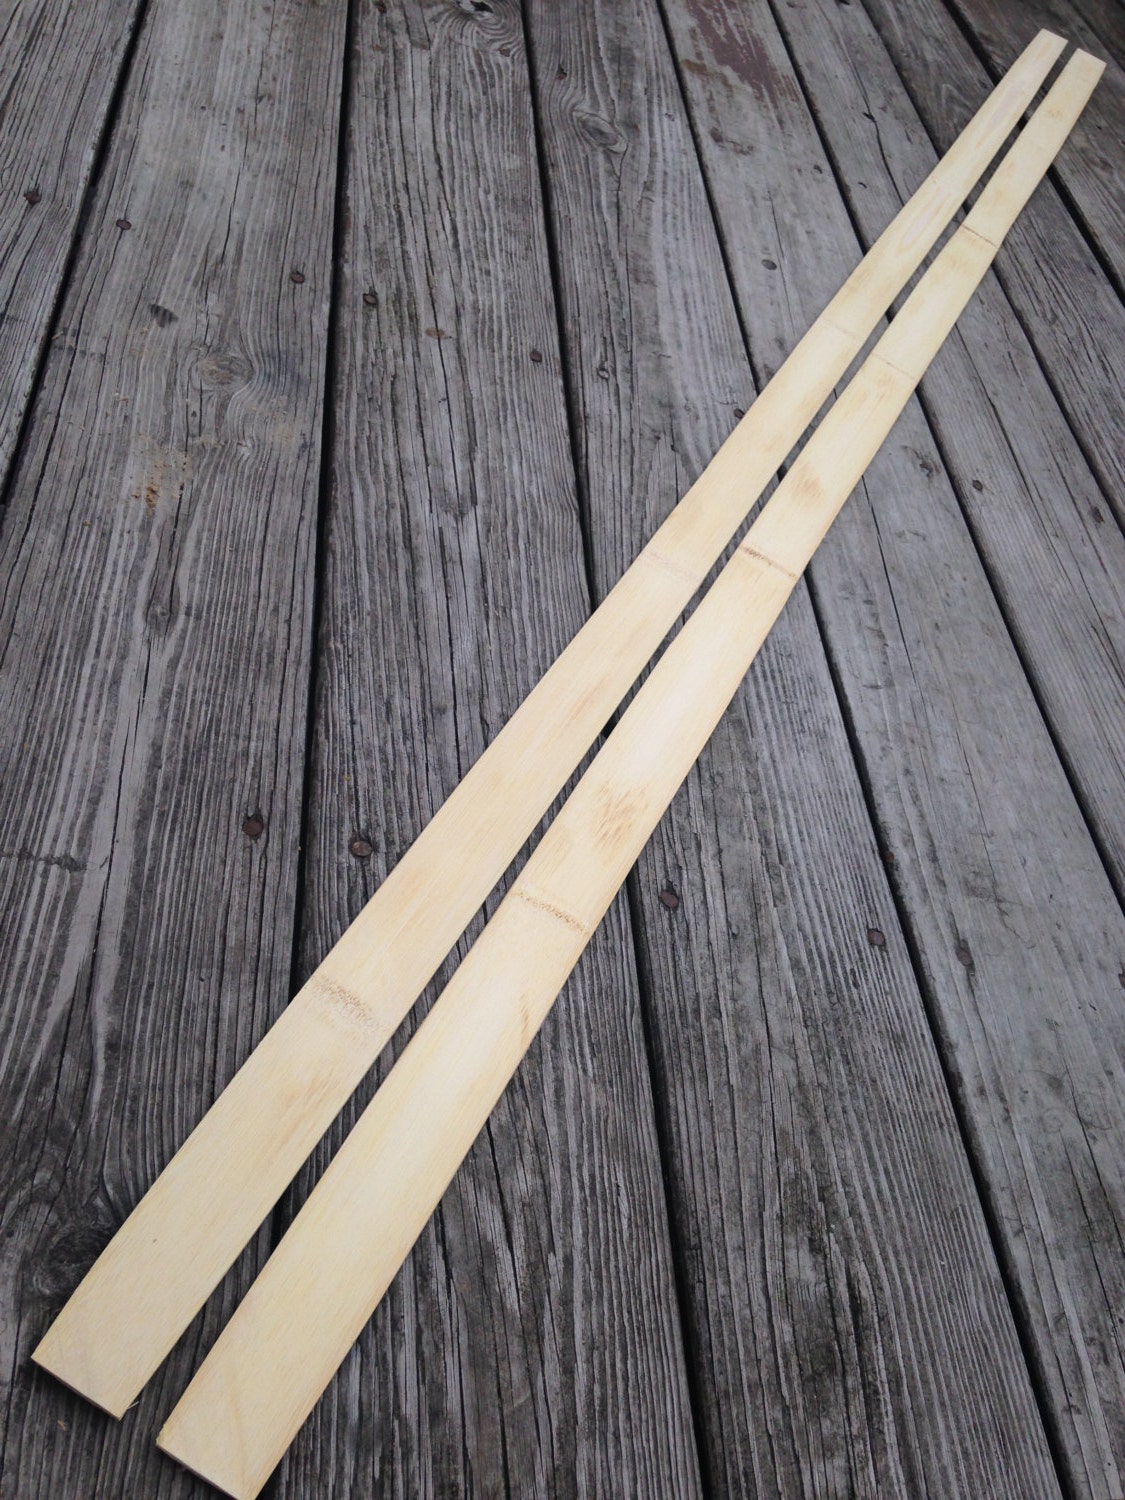 Bow Builders !! Need help with some Thin, tapered, wood strips